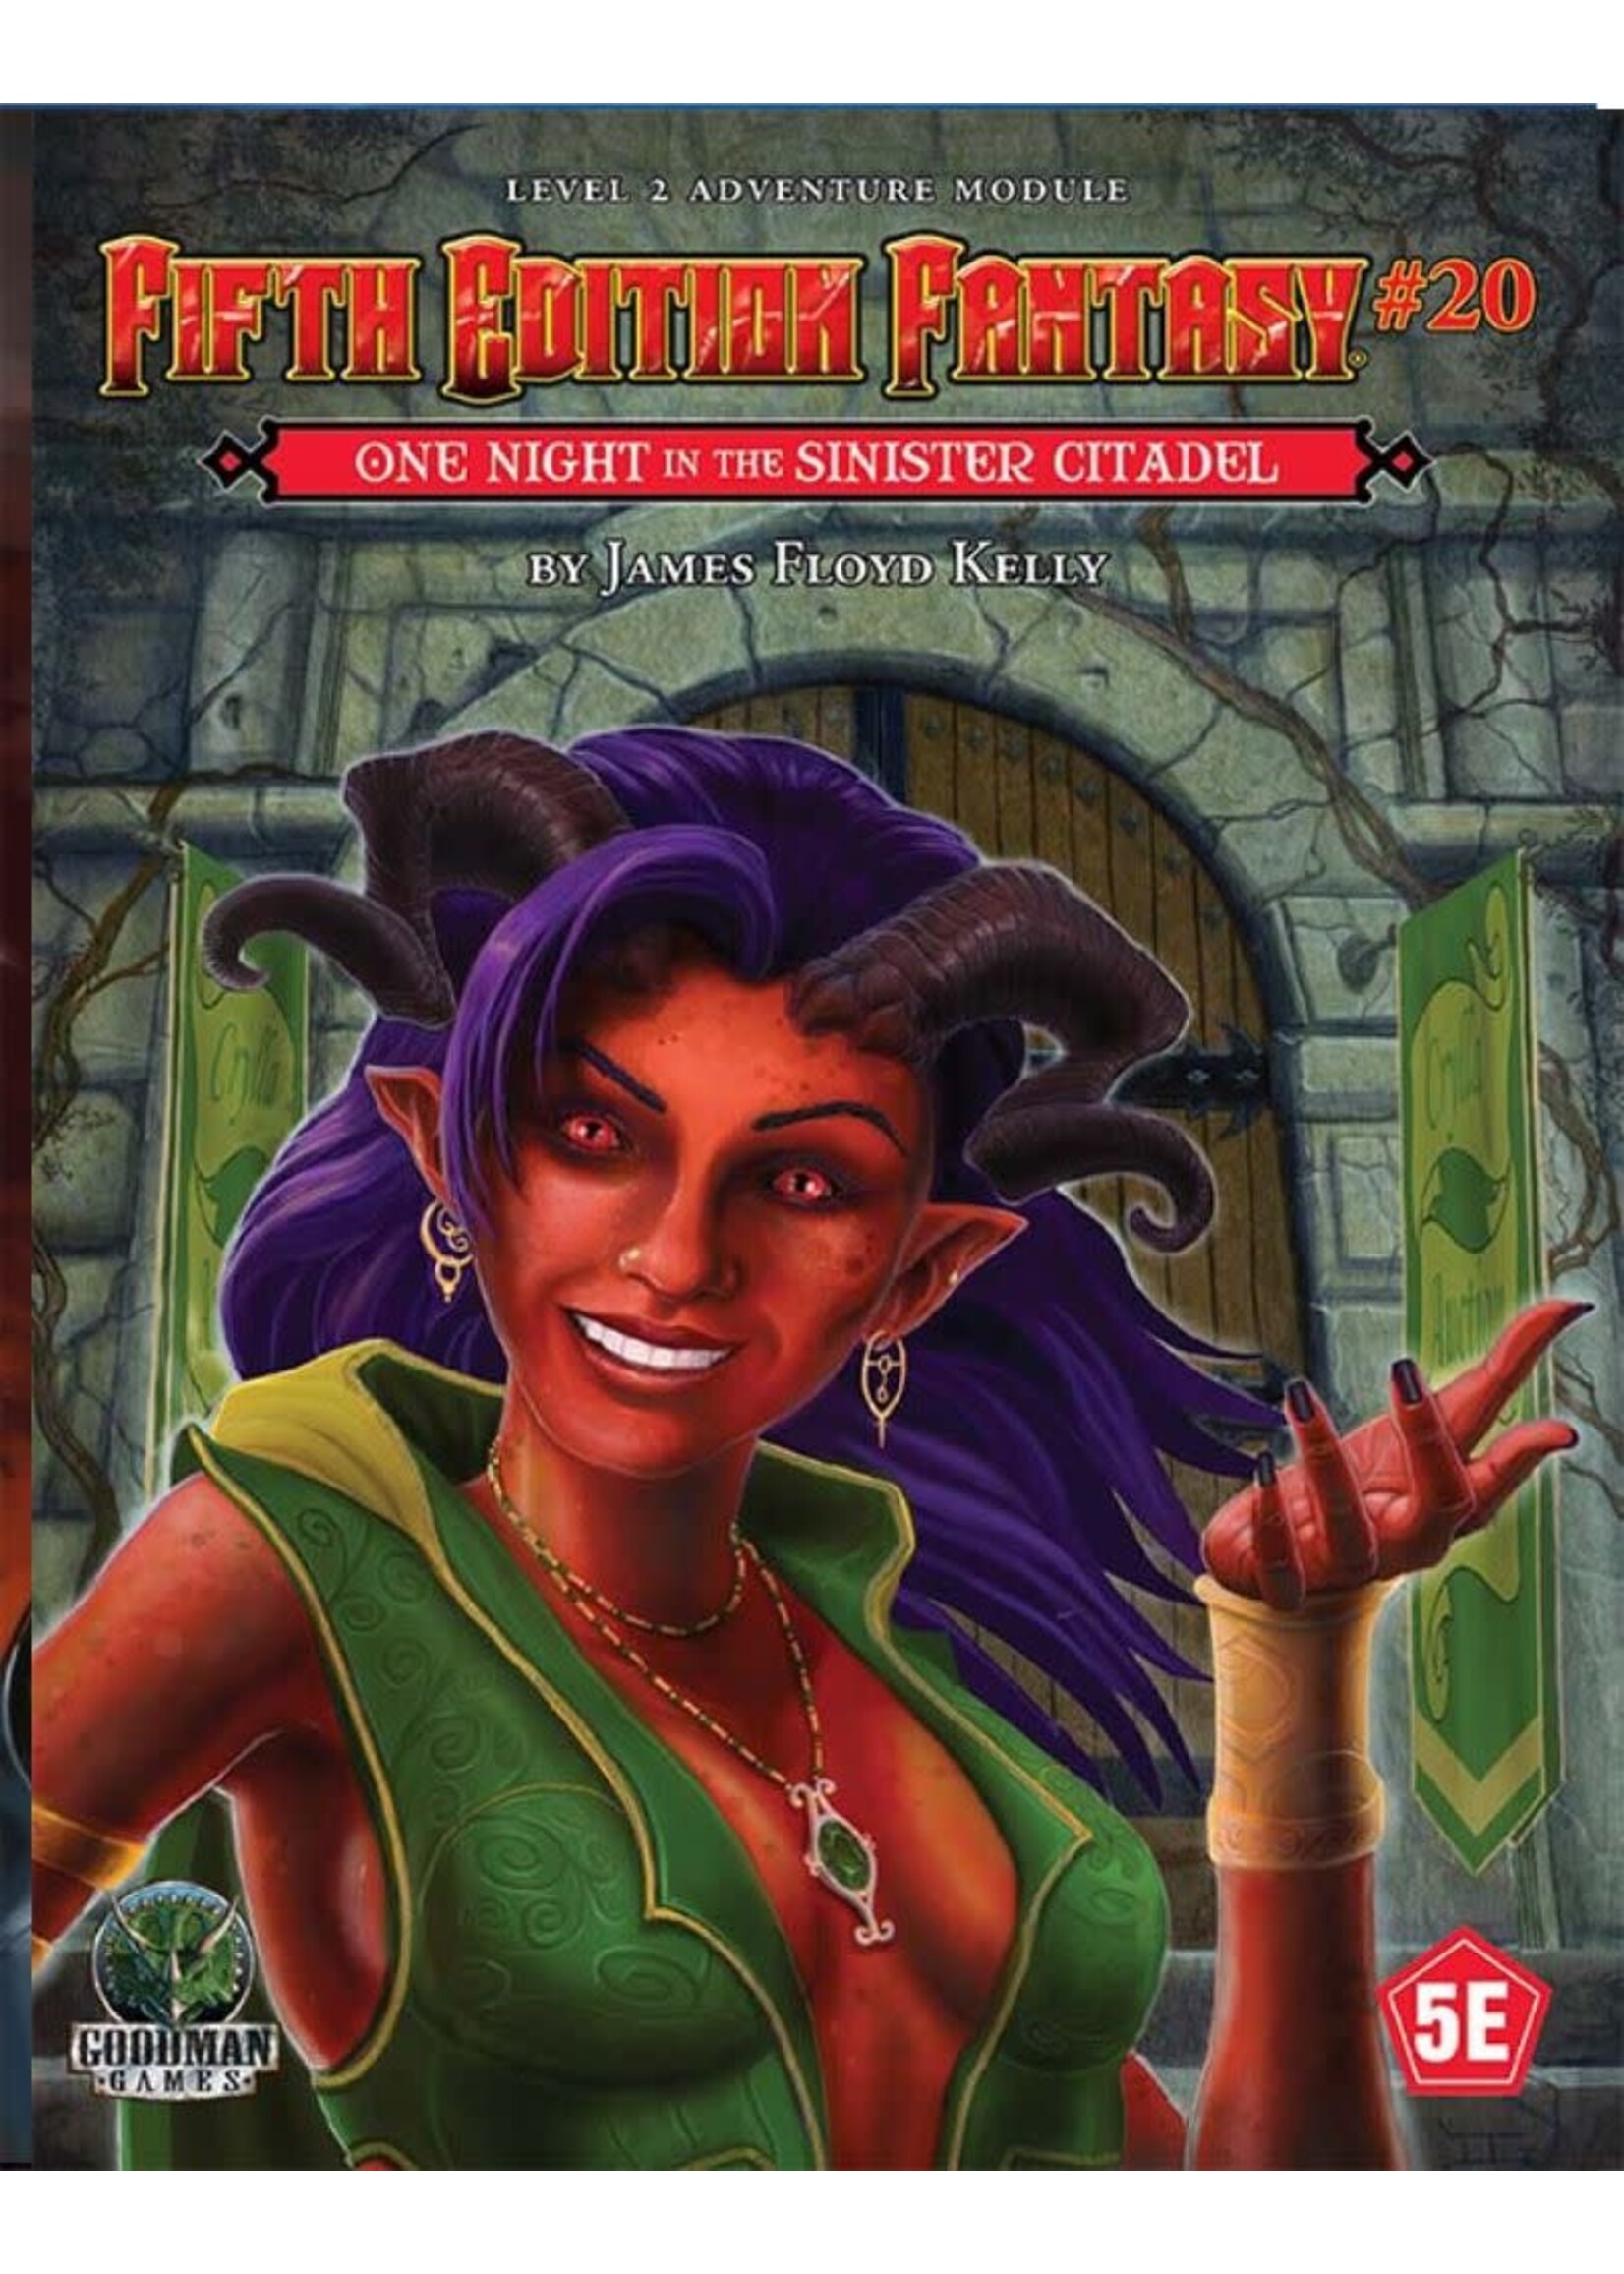 Goodman Games Fifth Edition Fantasy #18: One Night in the Sinister Citadel